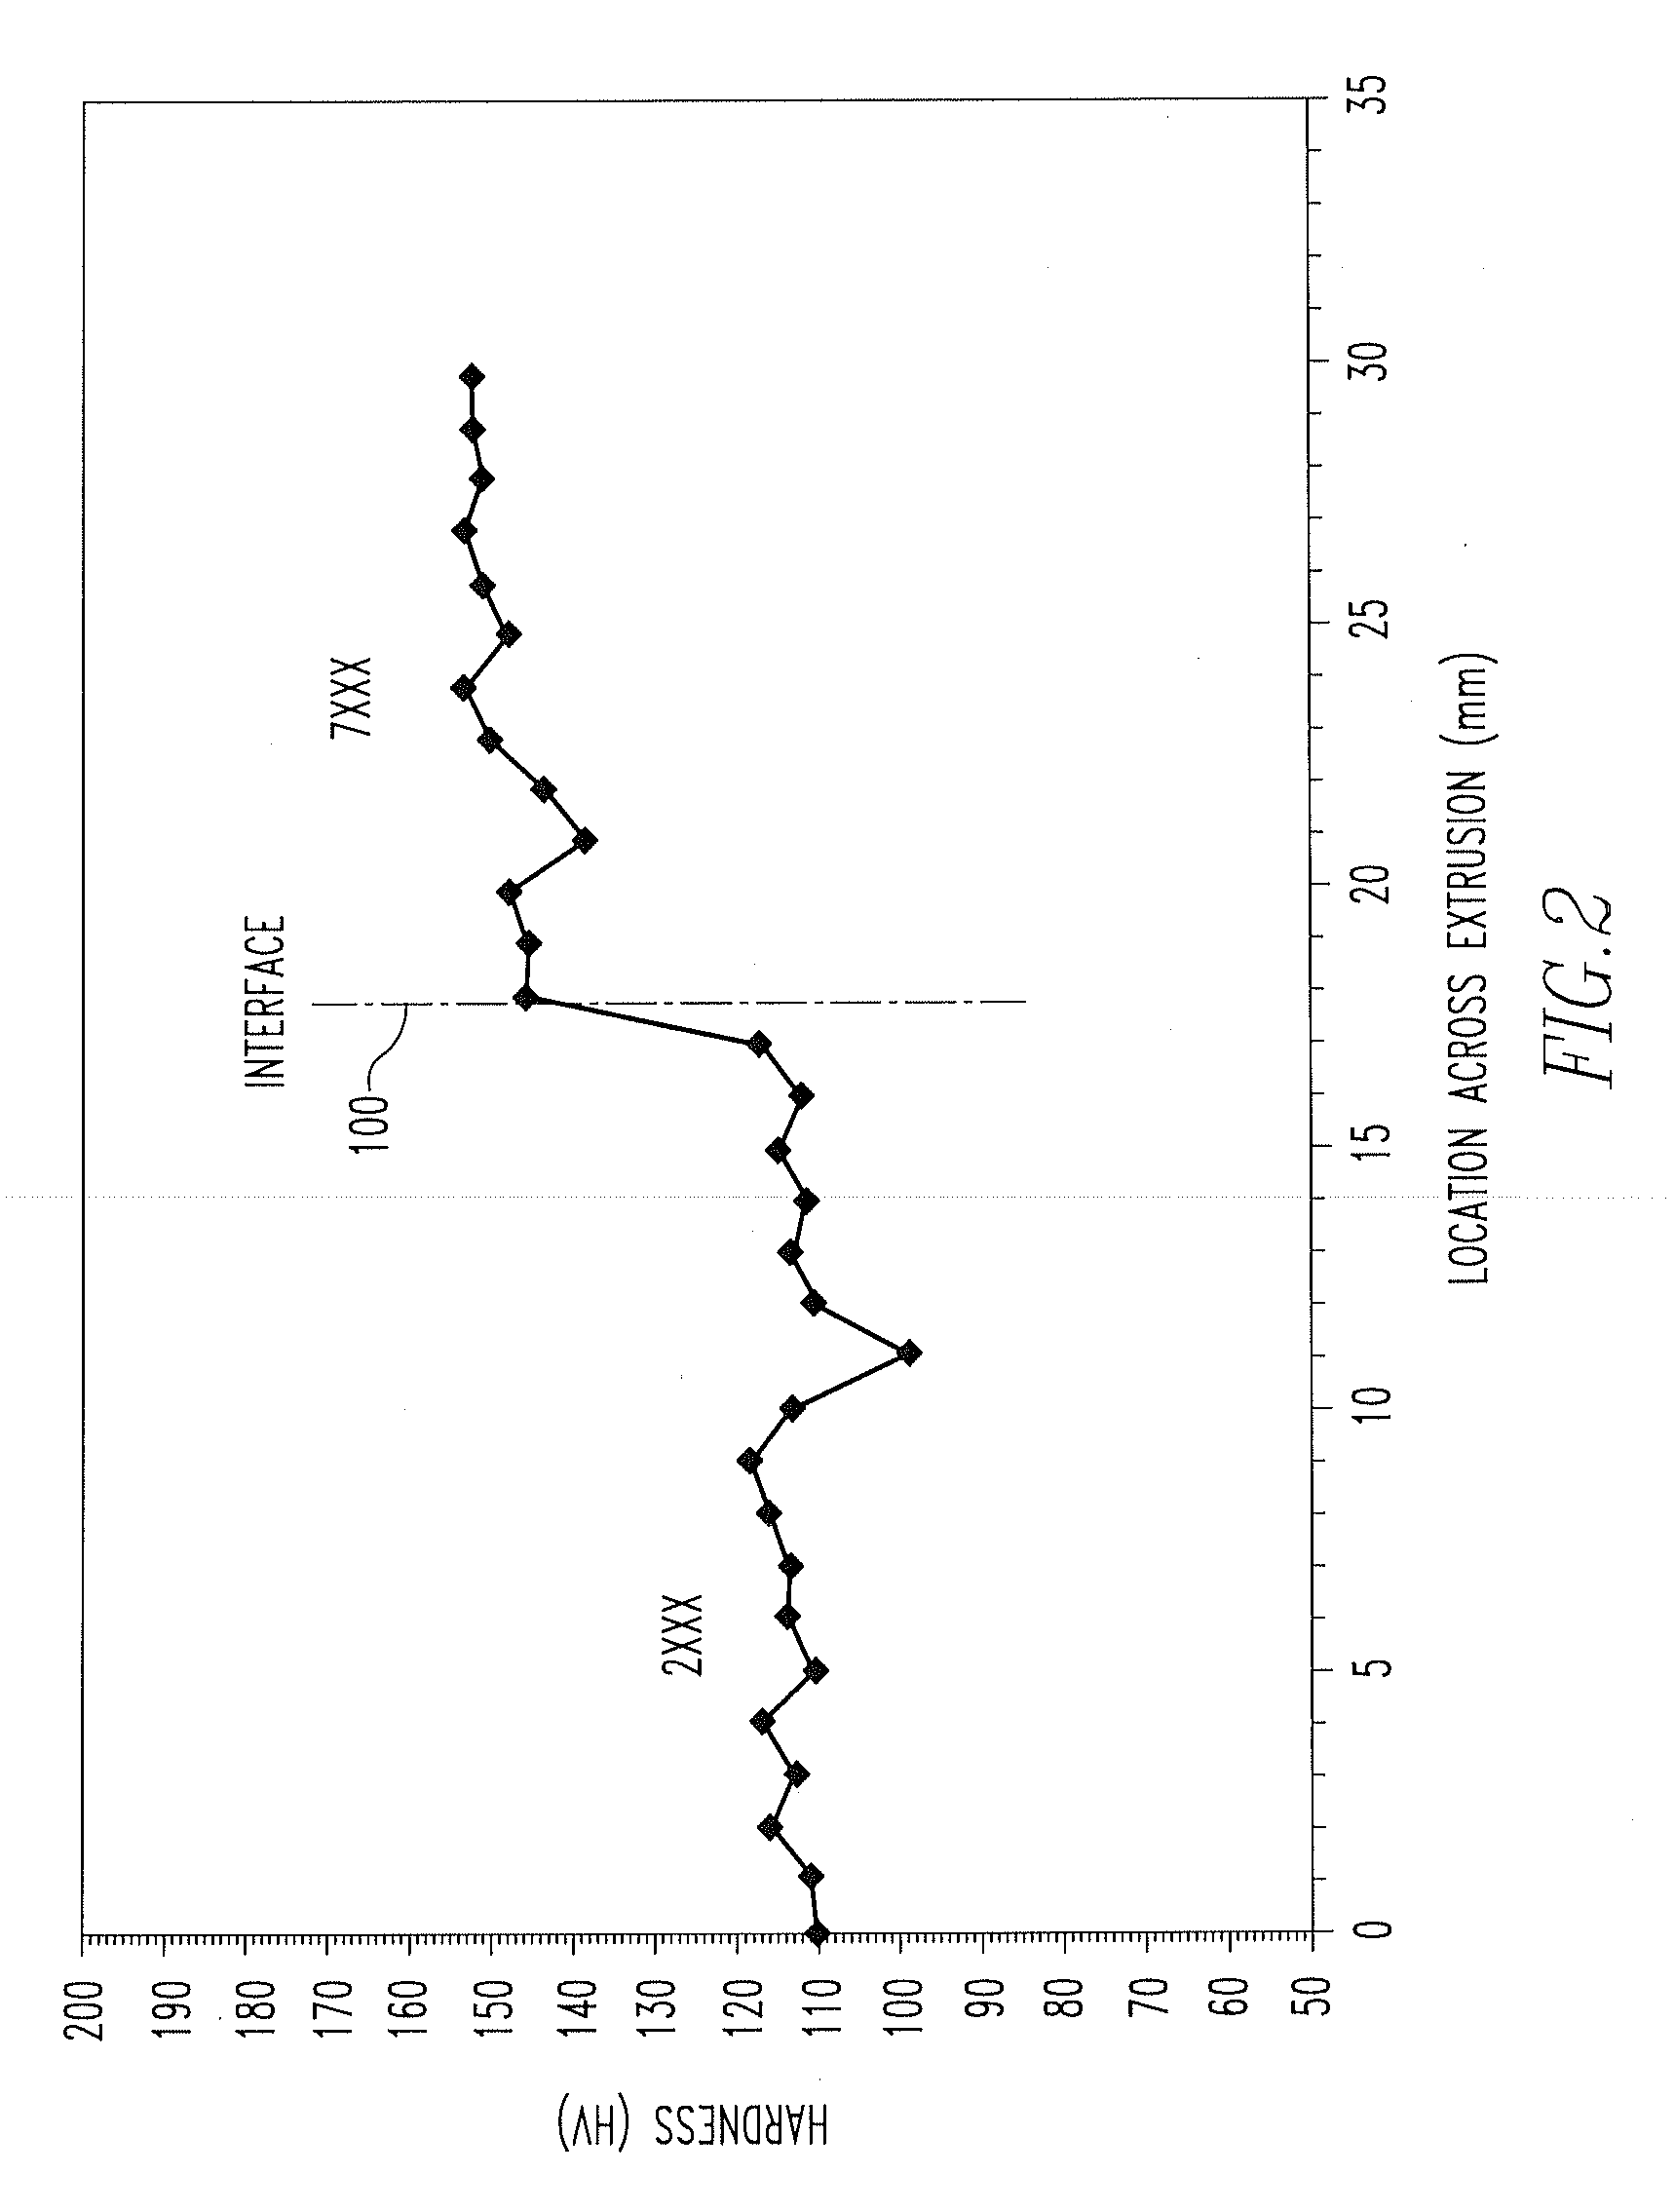 Multi-alloy monolithic extruded structural member and method of producing thereof